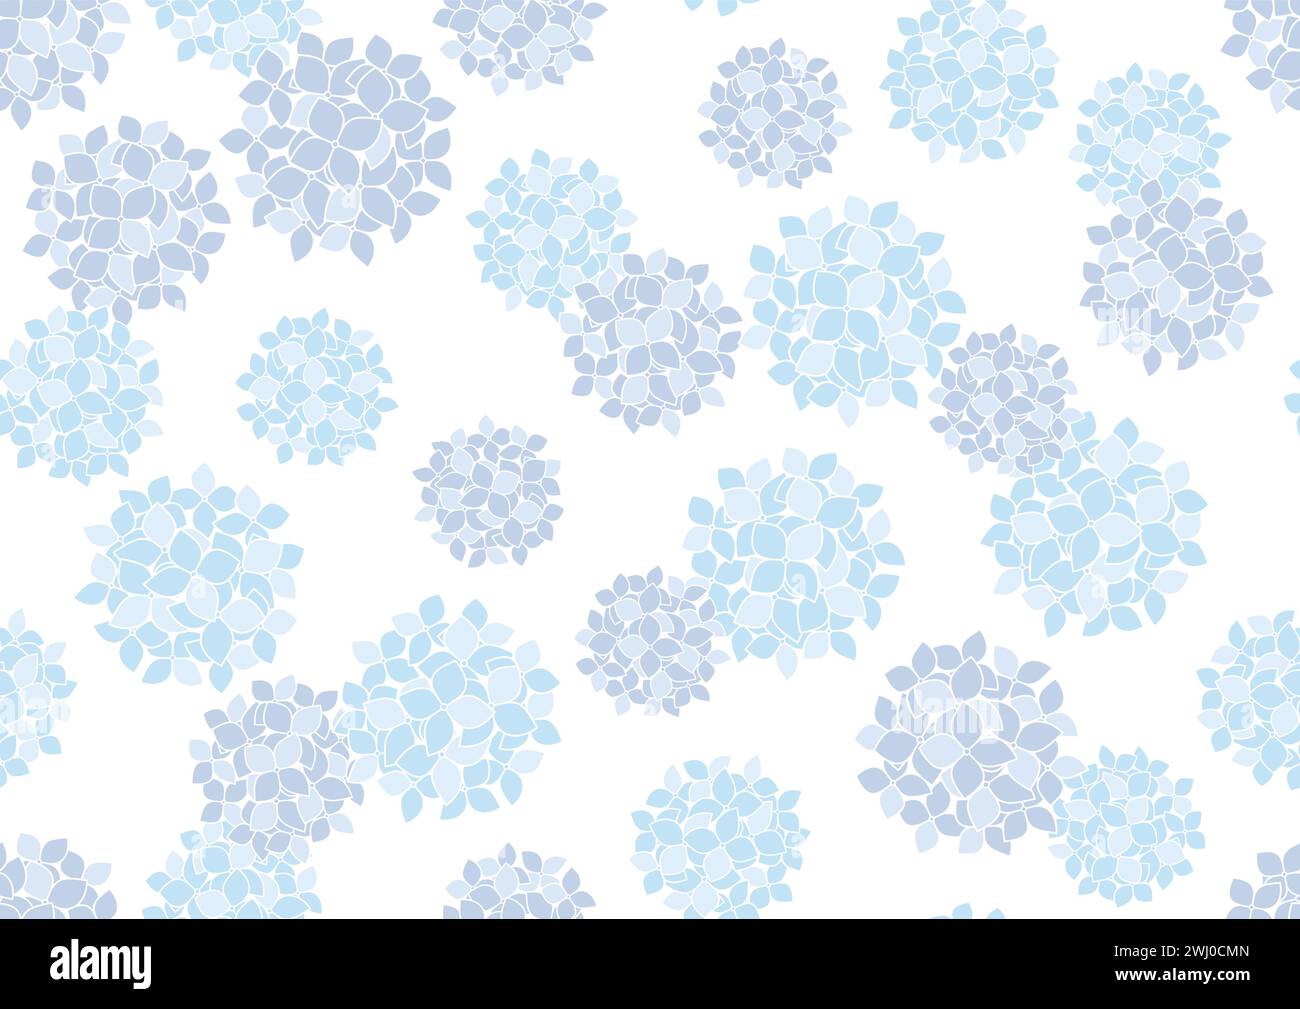 Seamless Blue Hydrangea Floral Pattern Vector Illustration Isolated On A White Background. Horizontally And Vertically Repeatable. Stock Vector